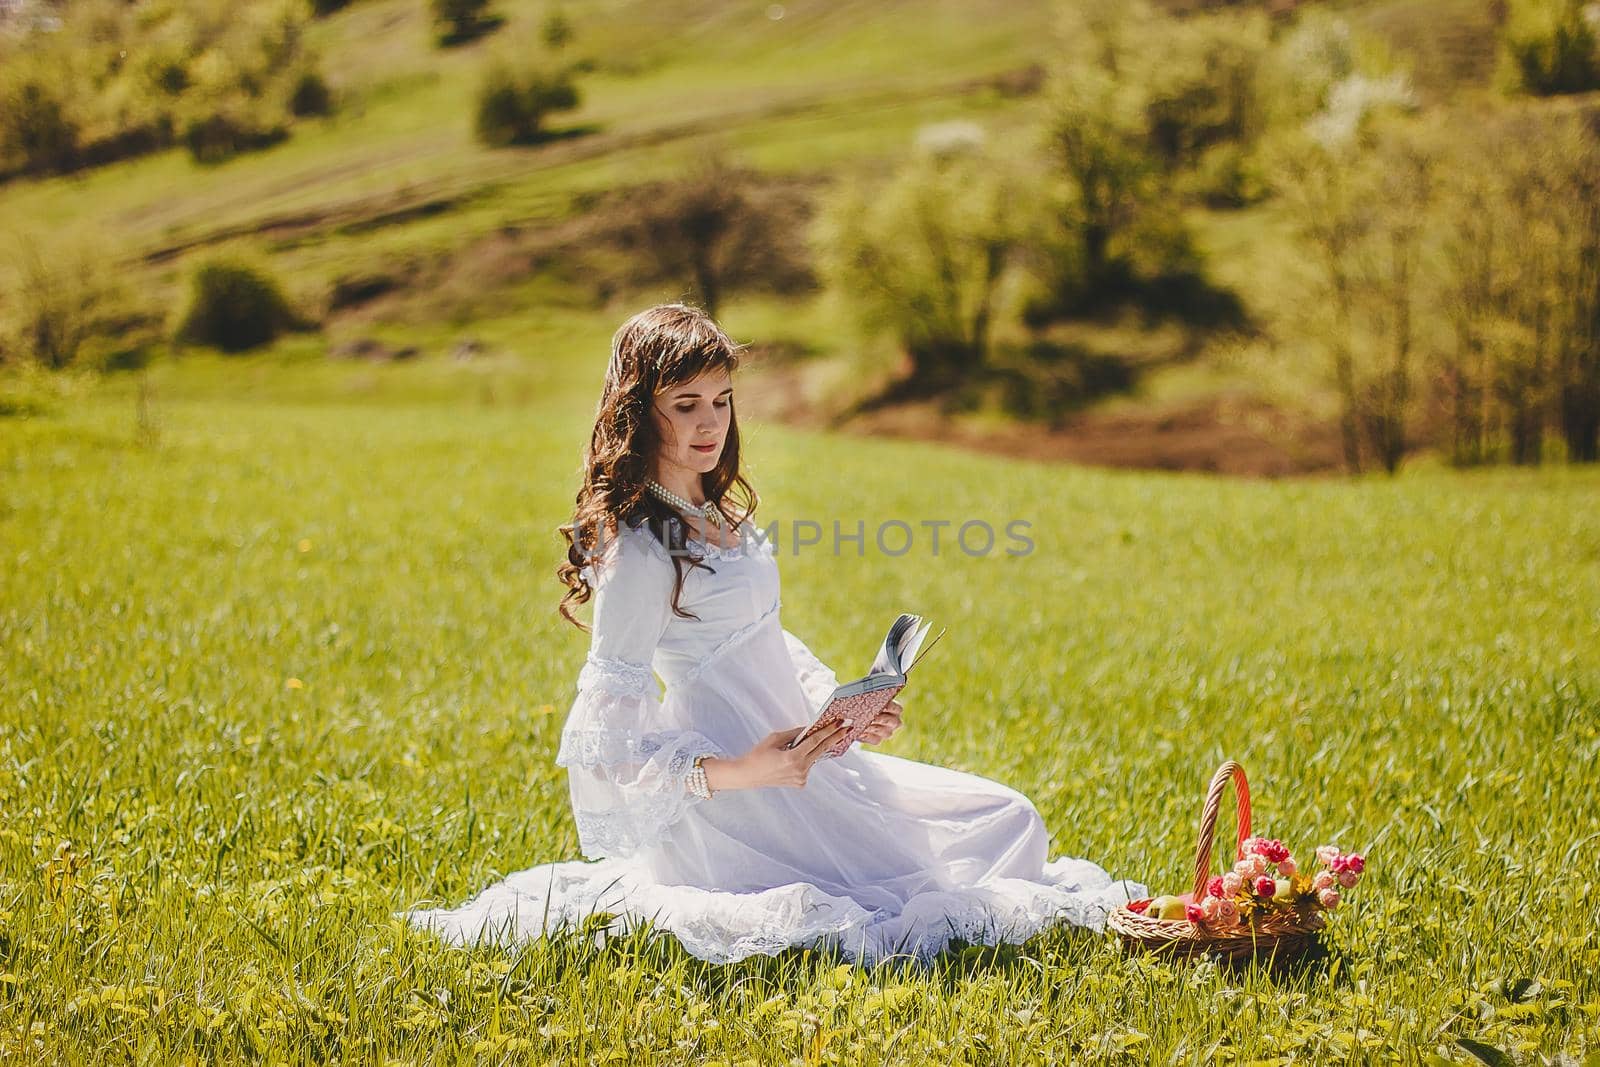 Portrait of carefree young woman in white vintage wedding style dress in spring cherry blossom garden valley.